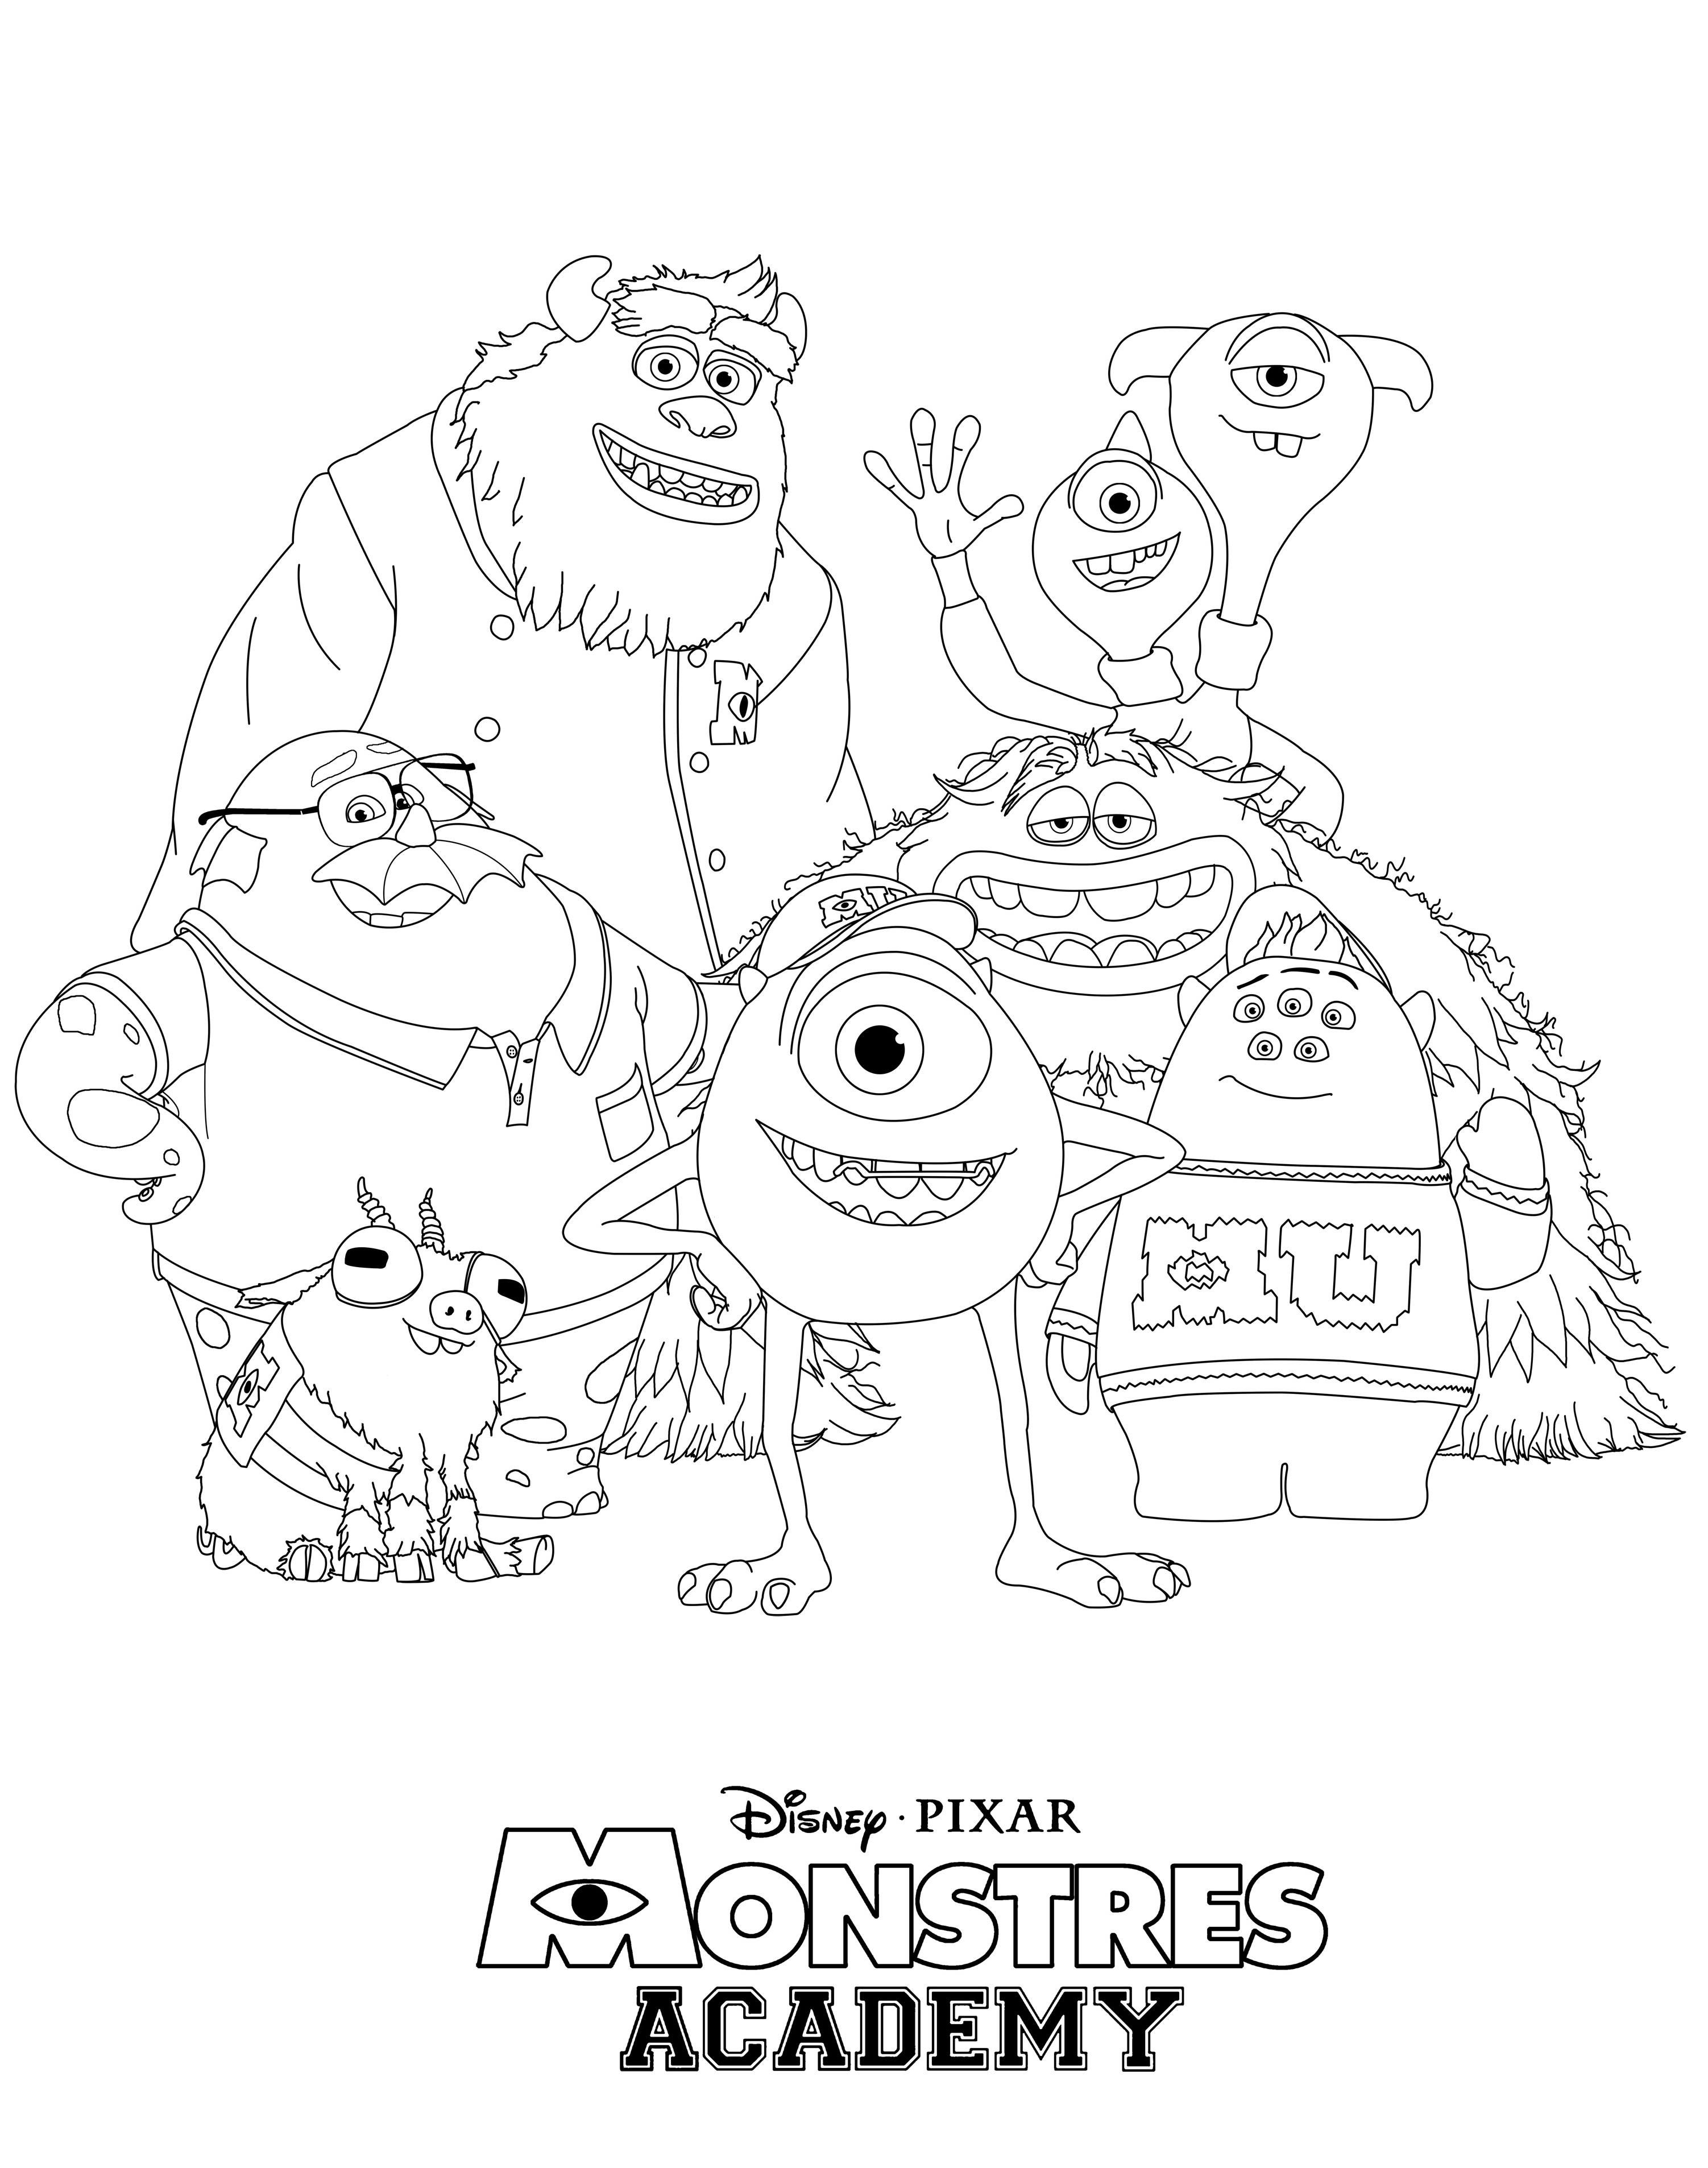 Monsters university coloring pages - Coloring for kids : monstres ...